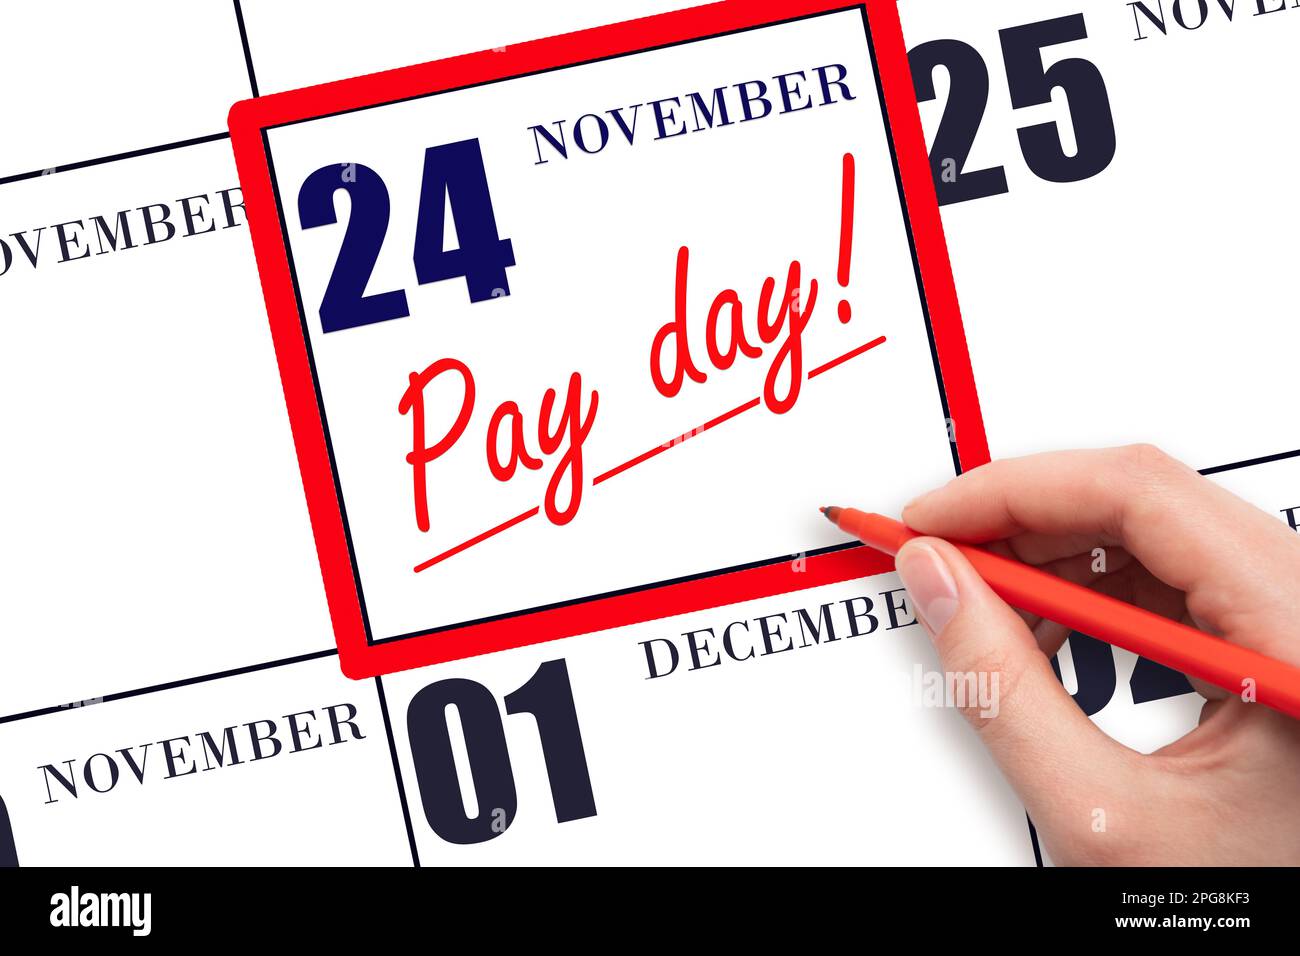 24th day of November. Hand writing text PAY DATE on calendar date November 24 and underline it. Payment due date. Reminder concept of payment. Autumn Stock Photo